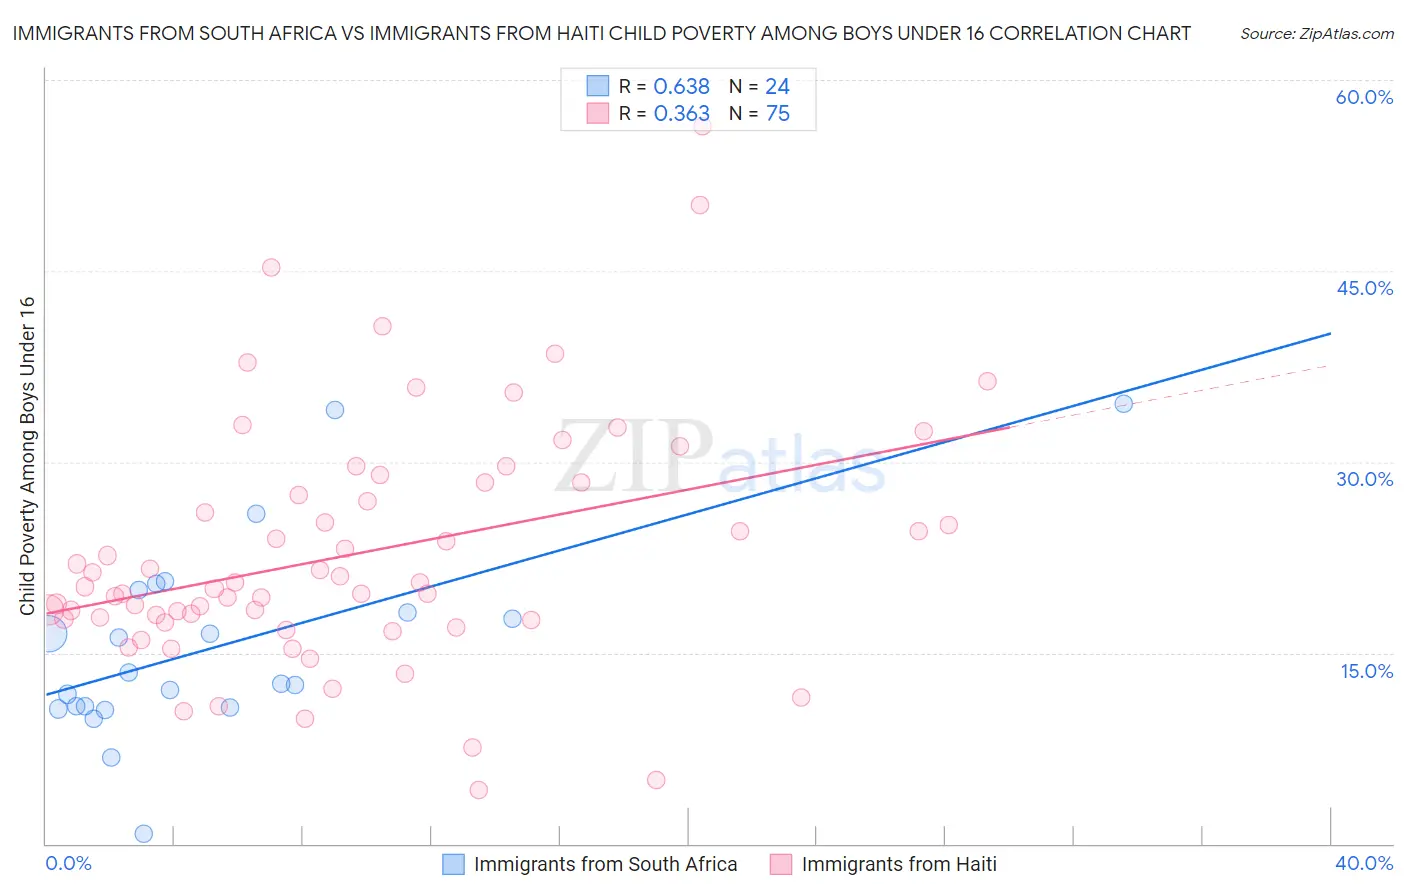 Immigrants from South Africa vs Immigrants from Haiti Child Poverty Among Boys Under 16